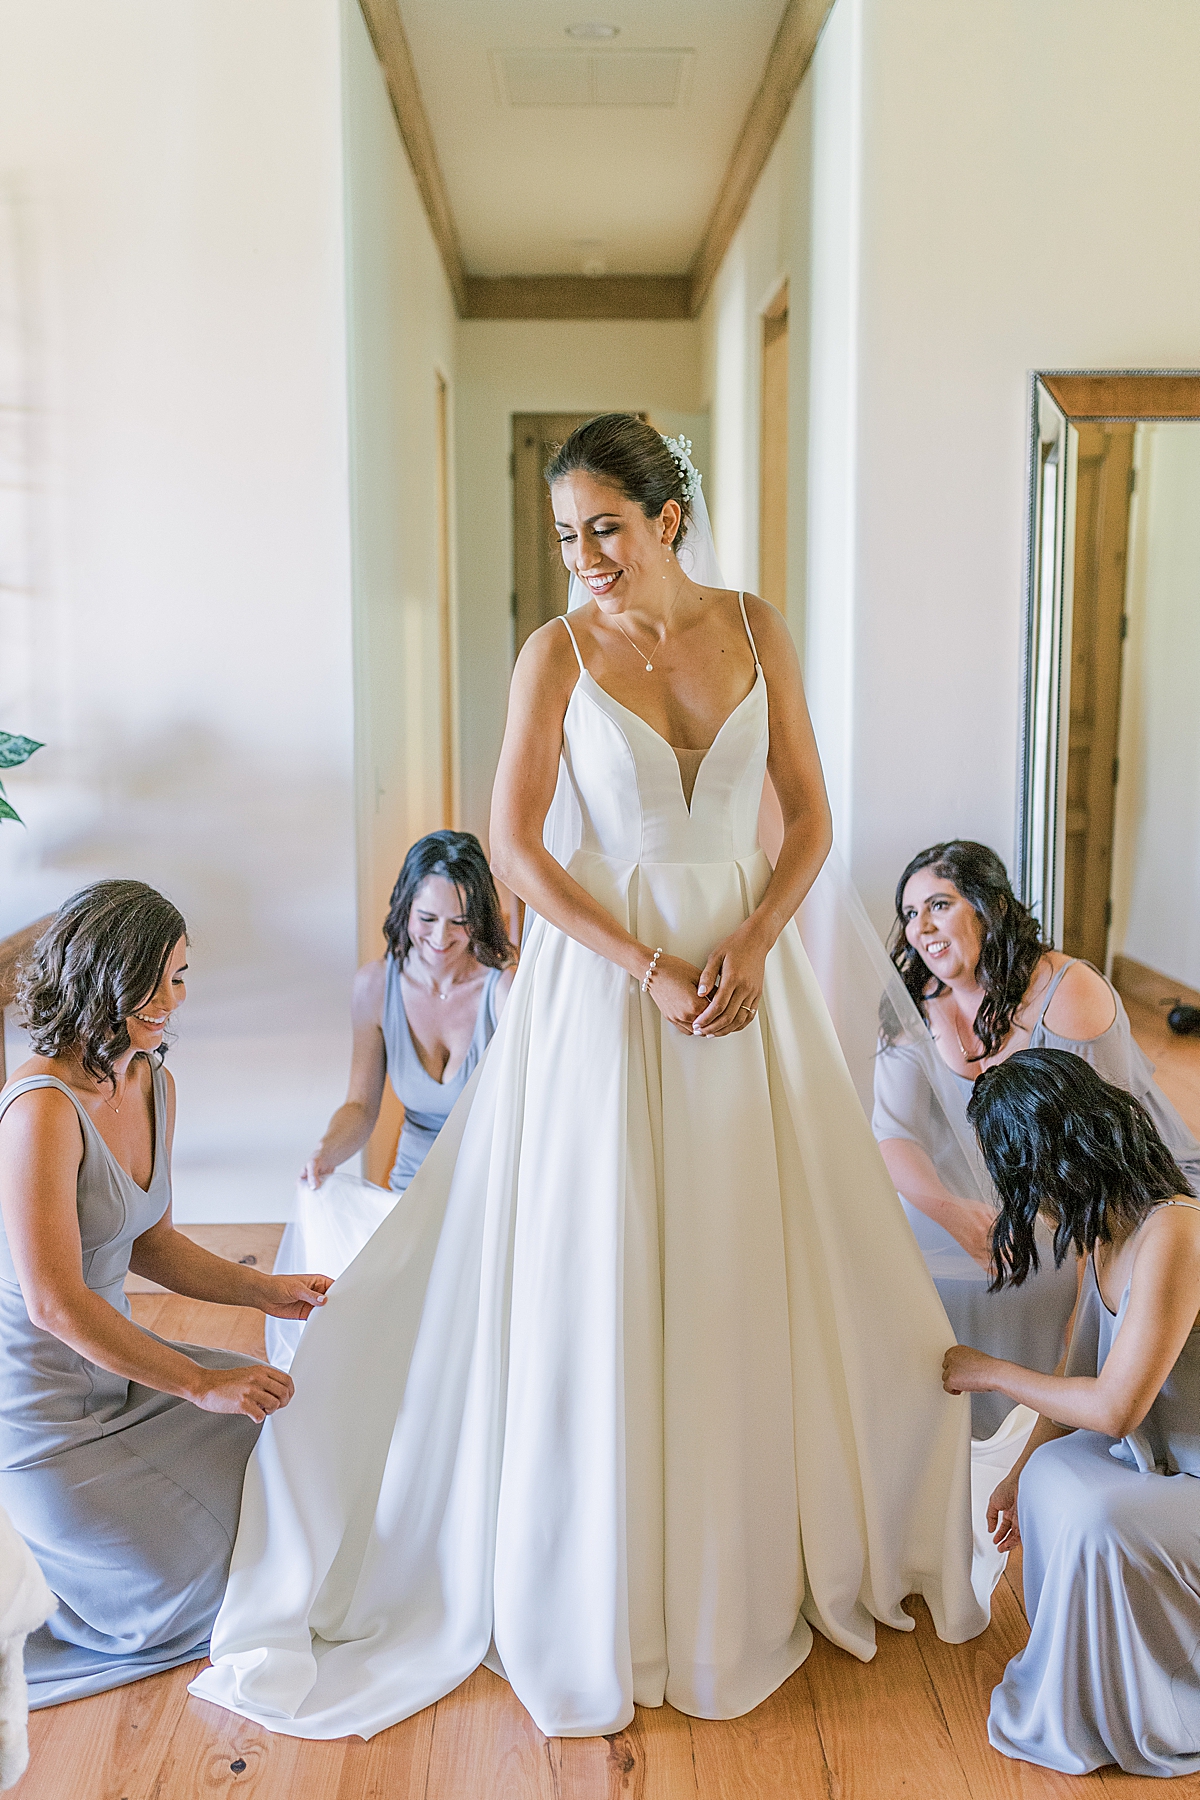 Kat's bridesmaids helping fluff her dress before finishing getting ready.